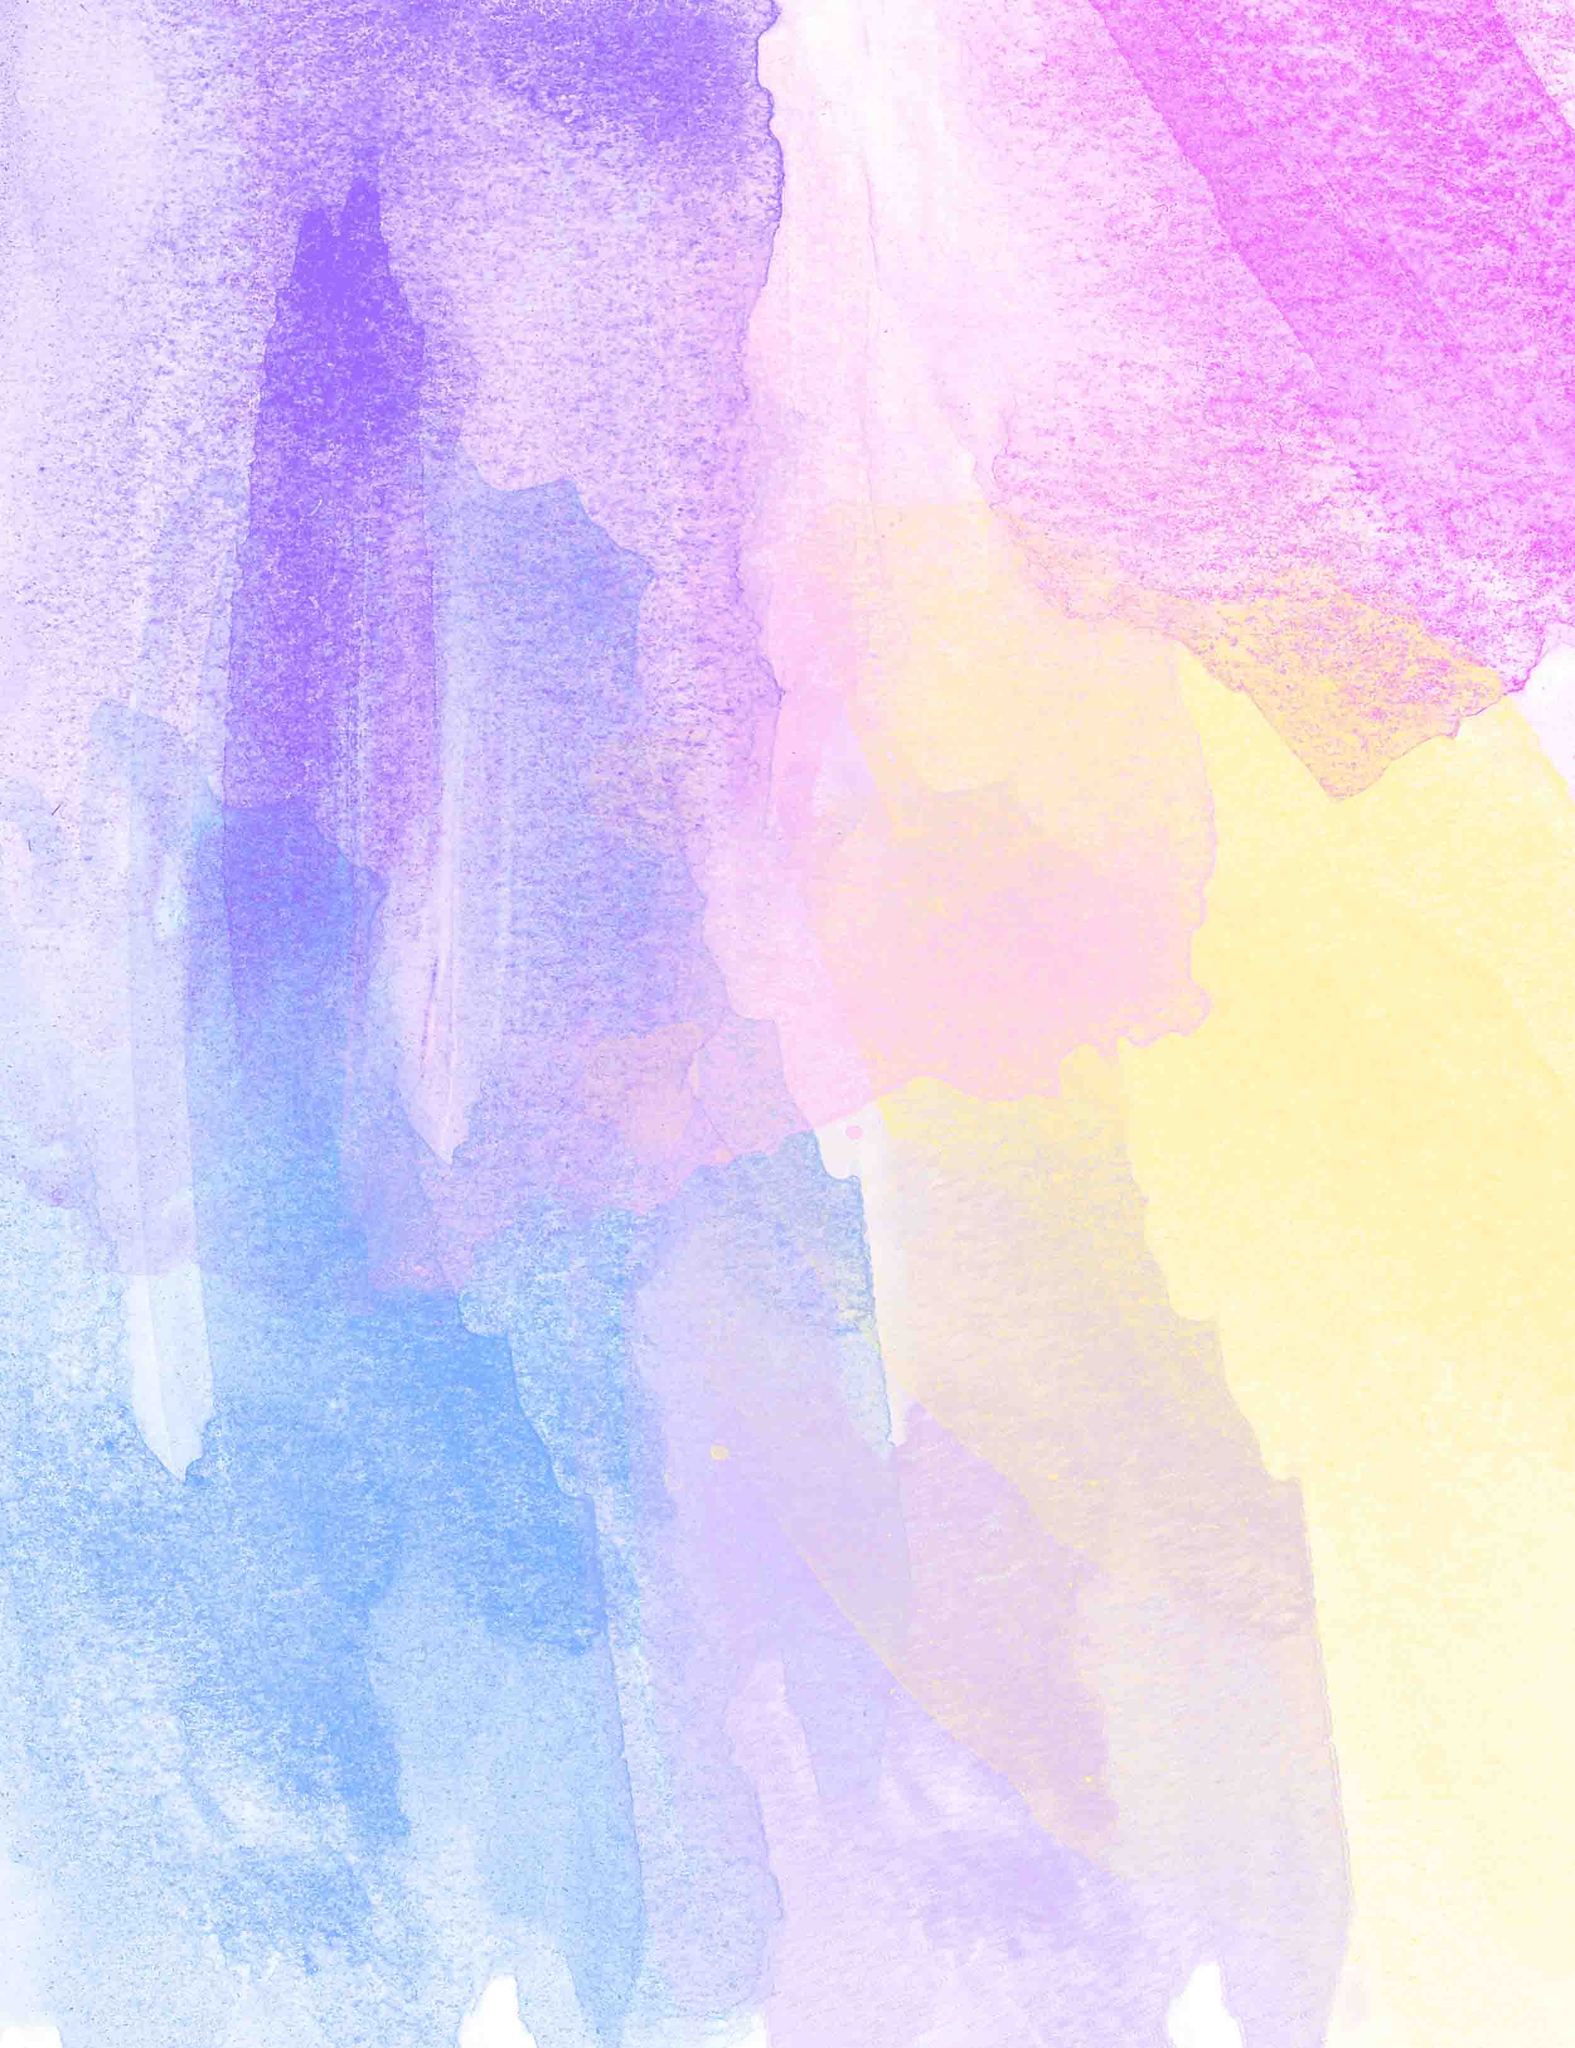 Abstract Pink Blue And Purple Watercolor Printed Texture Backdrop ...